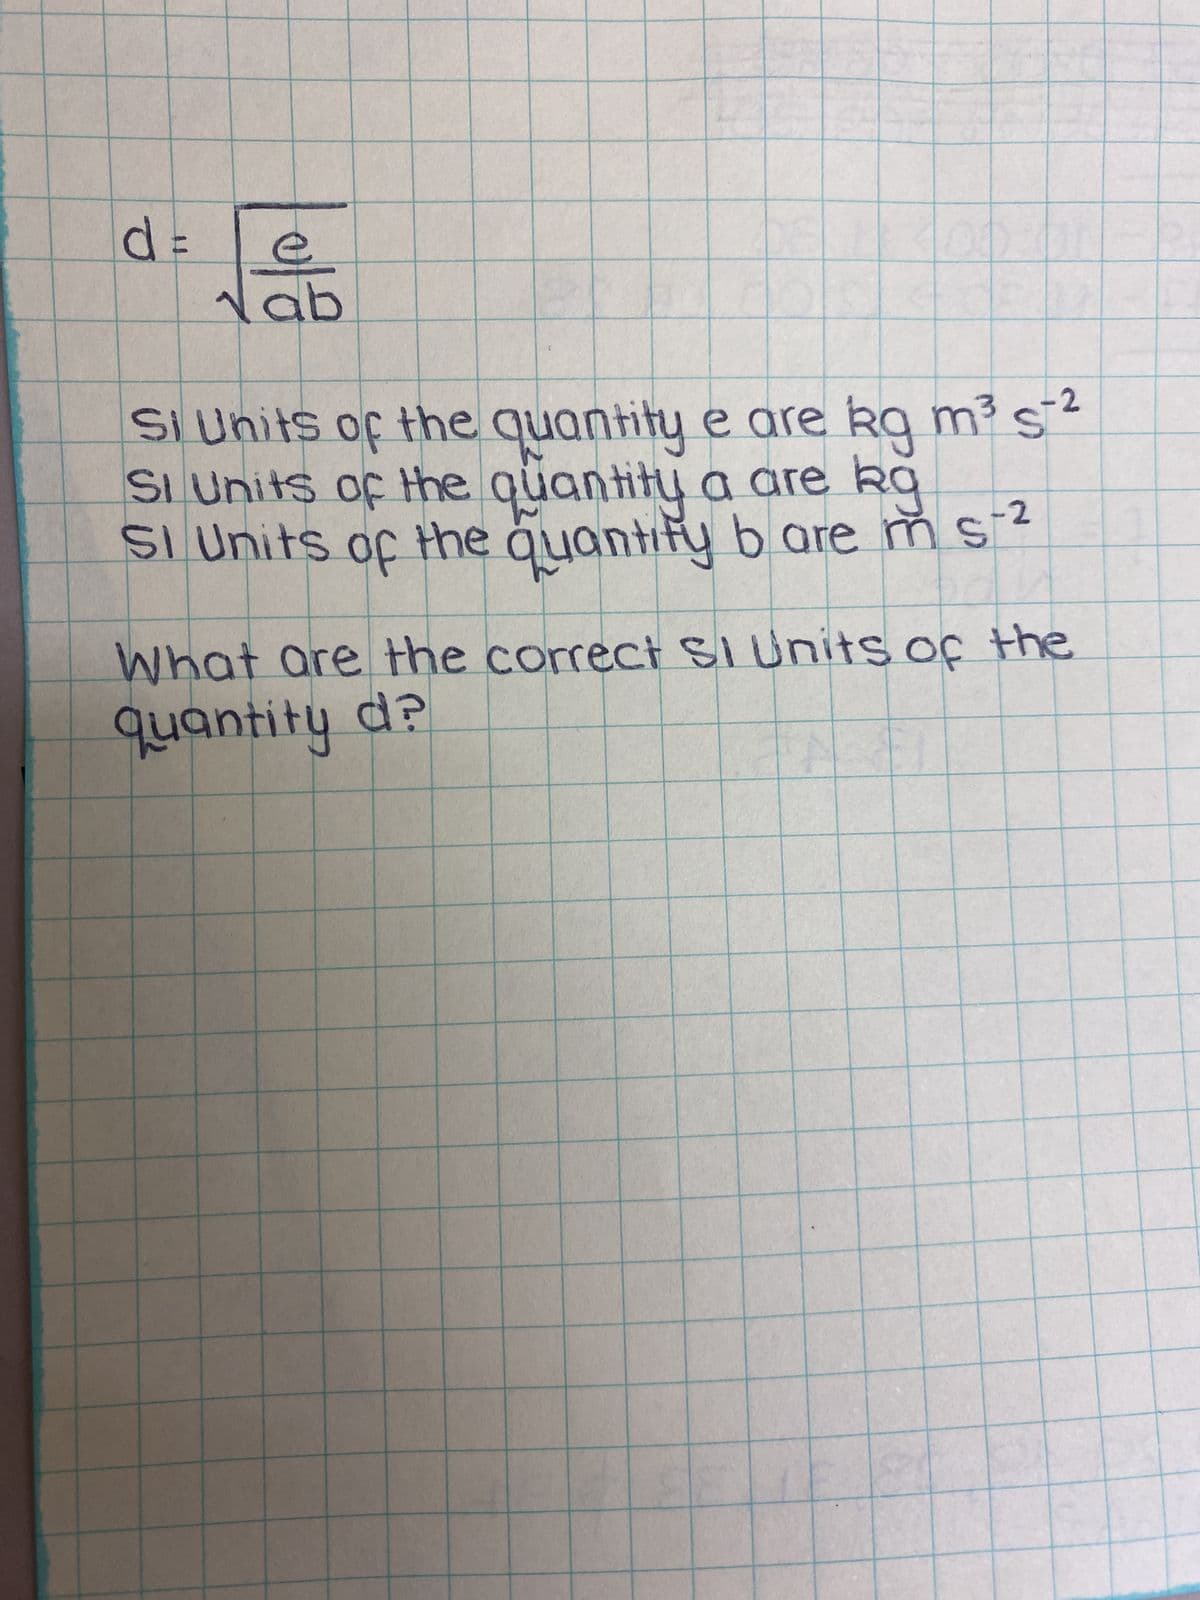 d=
e
ab
-2
S
SI Units of the quantity e are kg m³ s¯²
Si Units of the quantity a are kg
SI Units of the quantify b are m s2
-2
What are the correct SI Units of the
quantity d?
IN